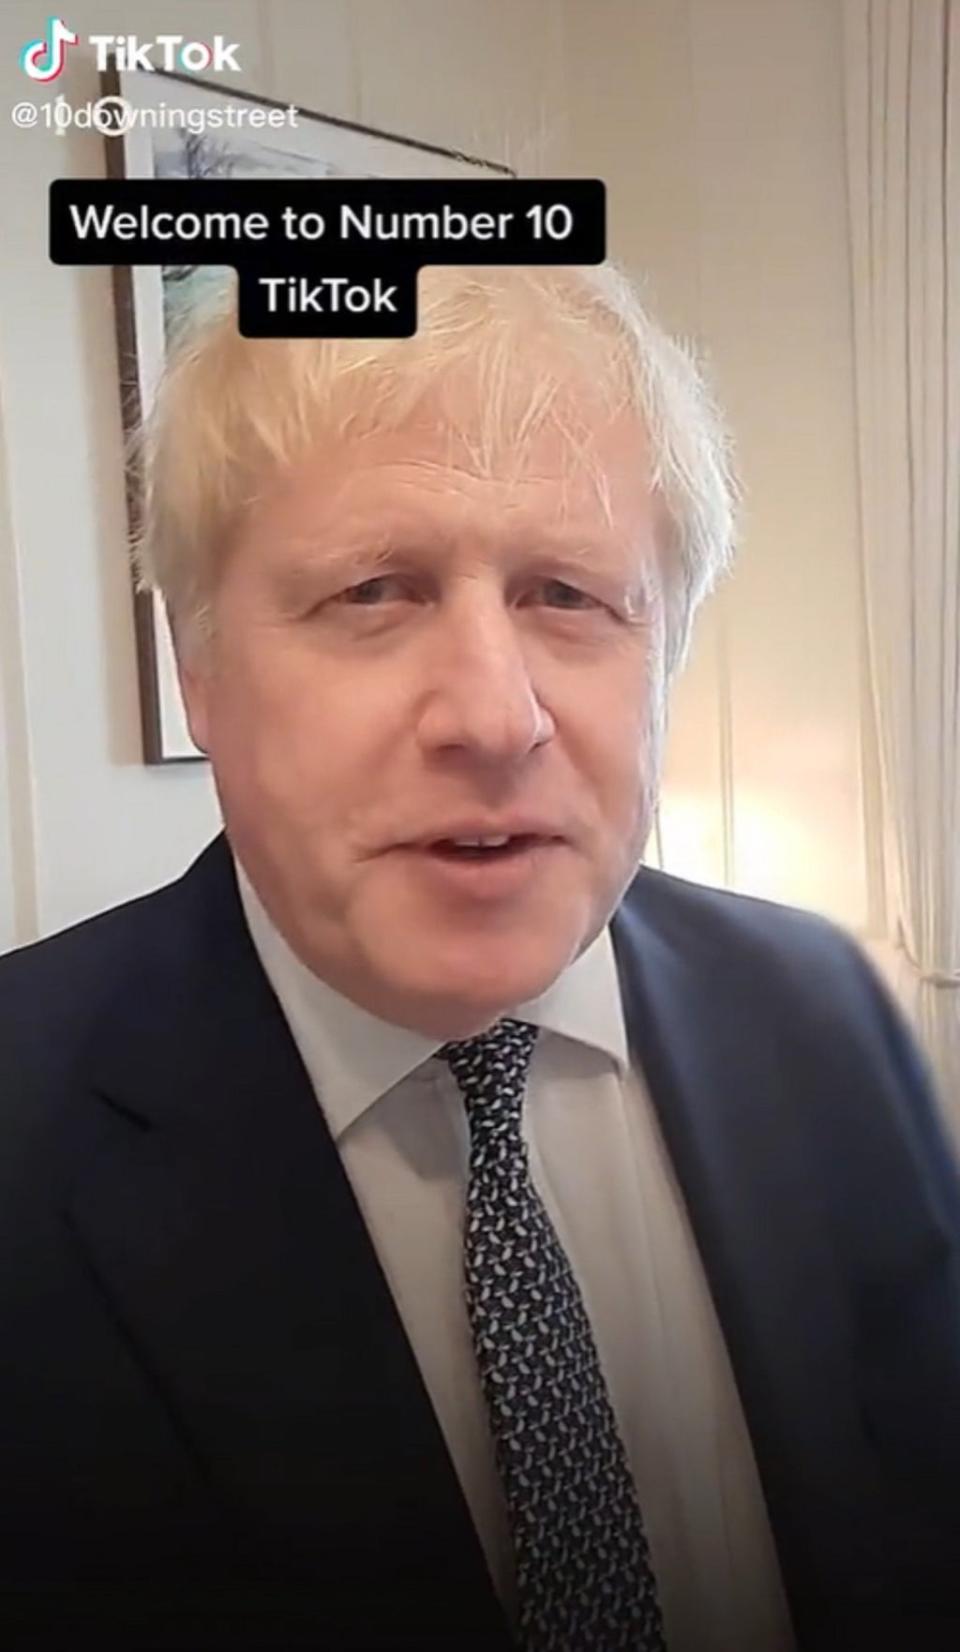 Boris Johnson appeared in the first video from 10downingstreet on Tuesday 10 May (10downingstreet/TikTok)